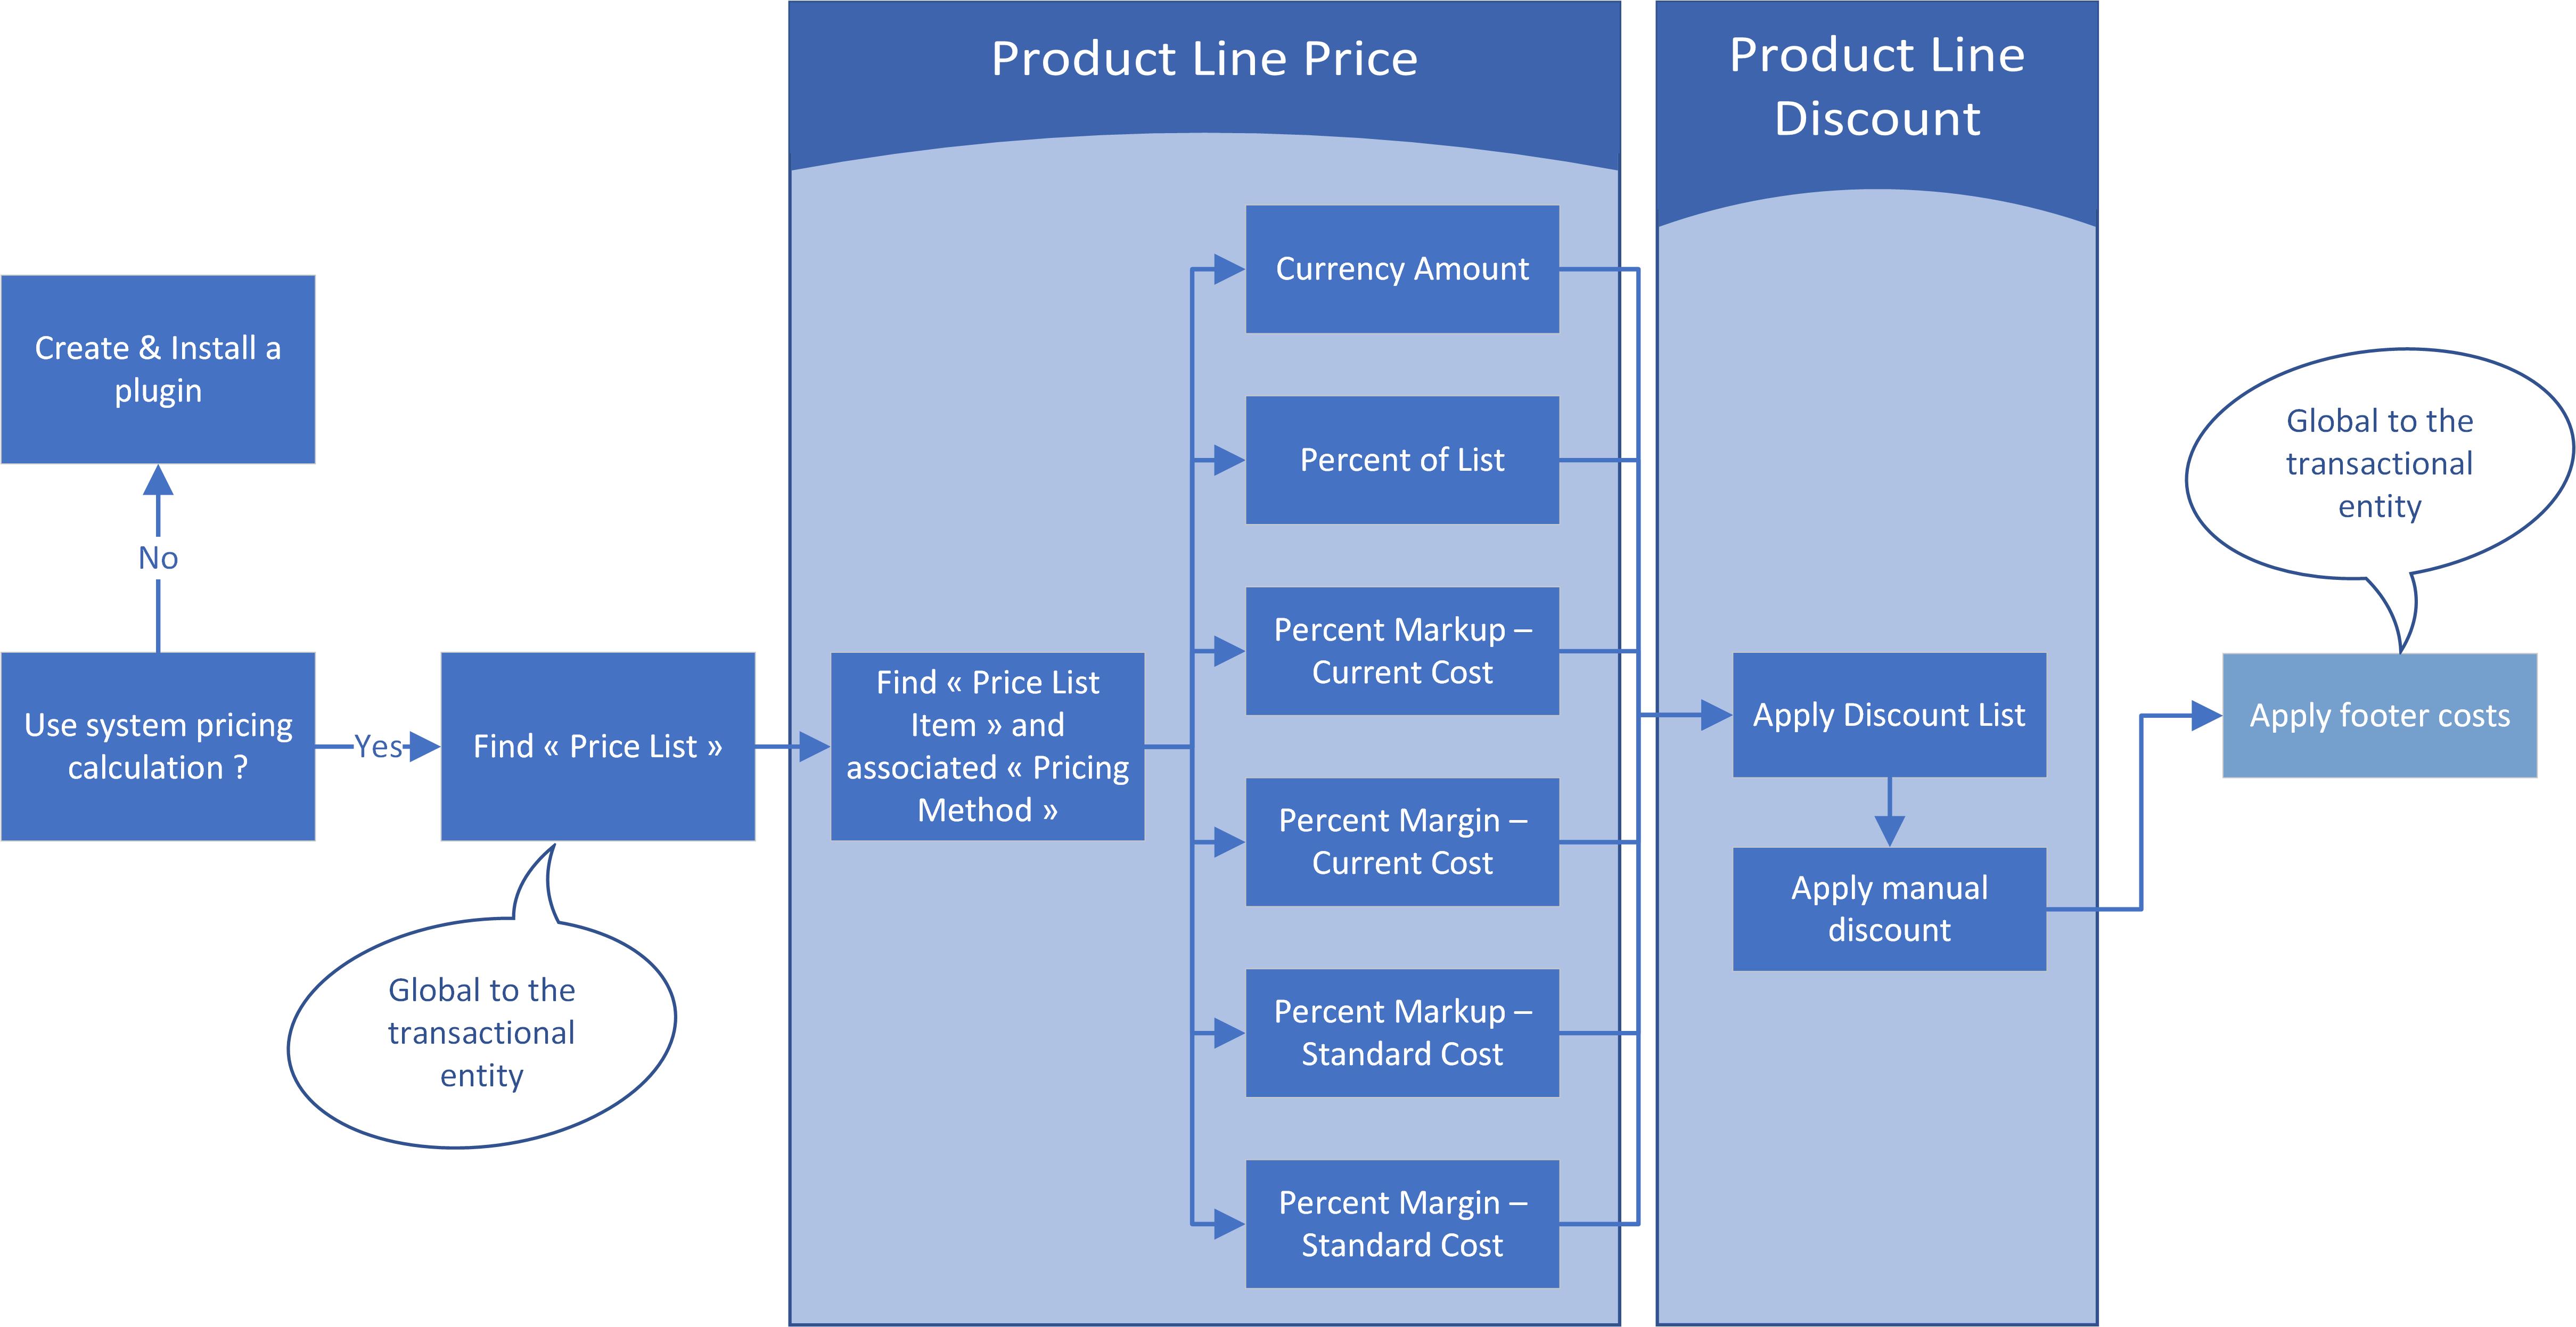 Price System. Pricing methods. Product line pricing. Product Price. Pricing method